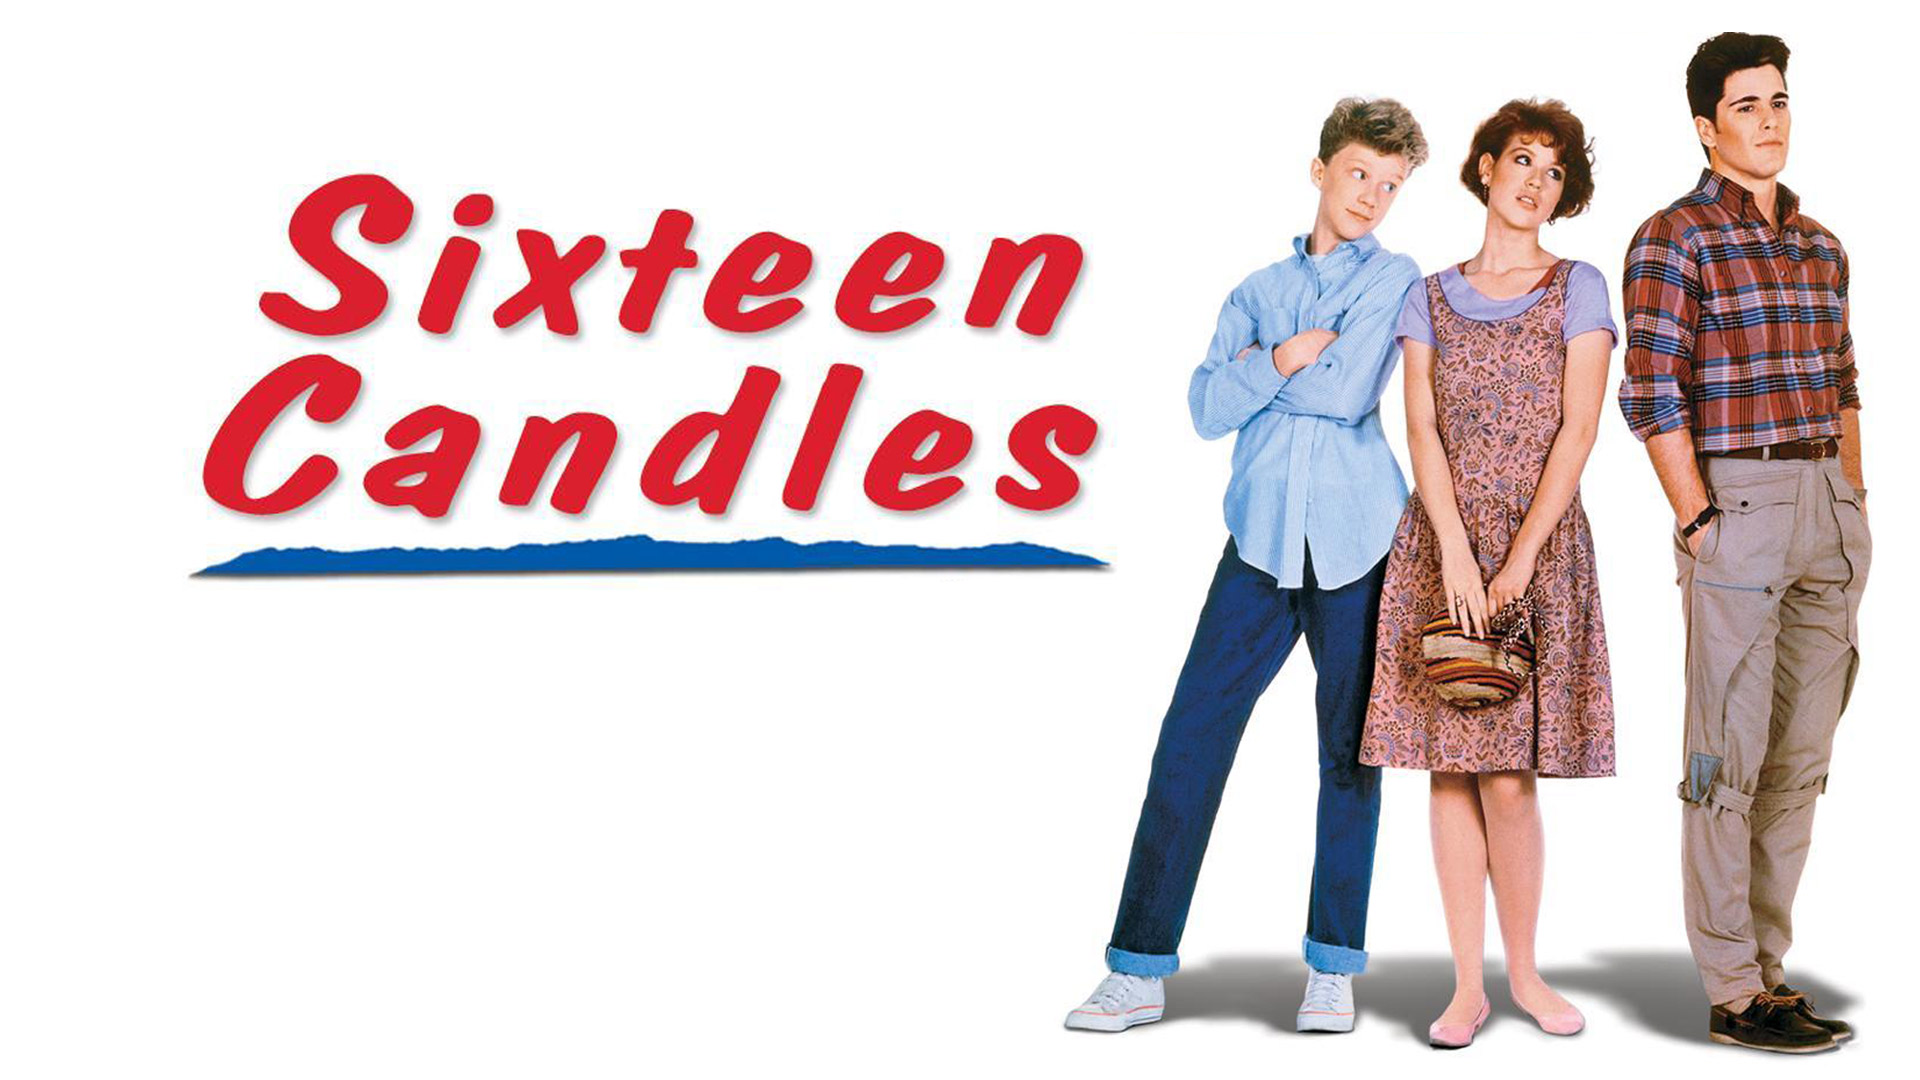 44-facts-about-the-movie-sixteen-candles